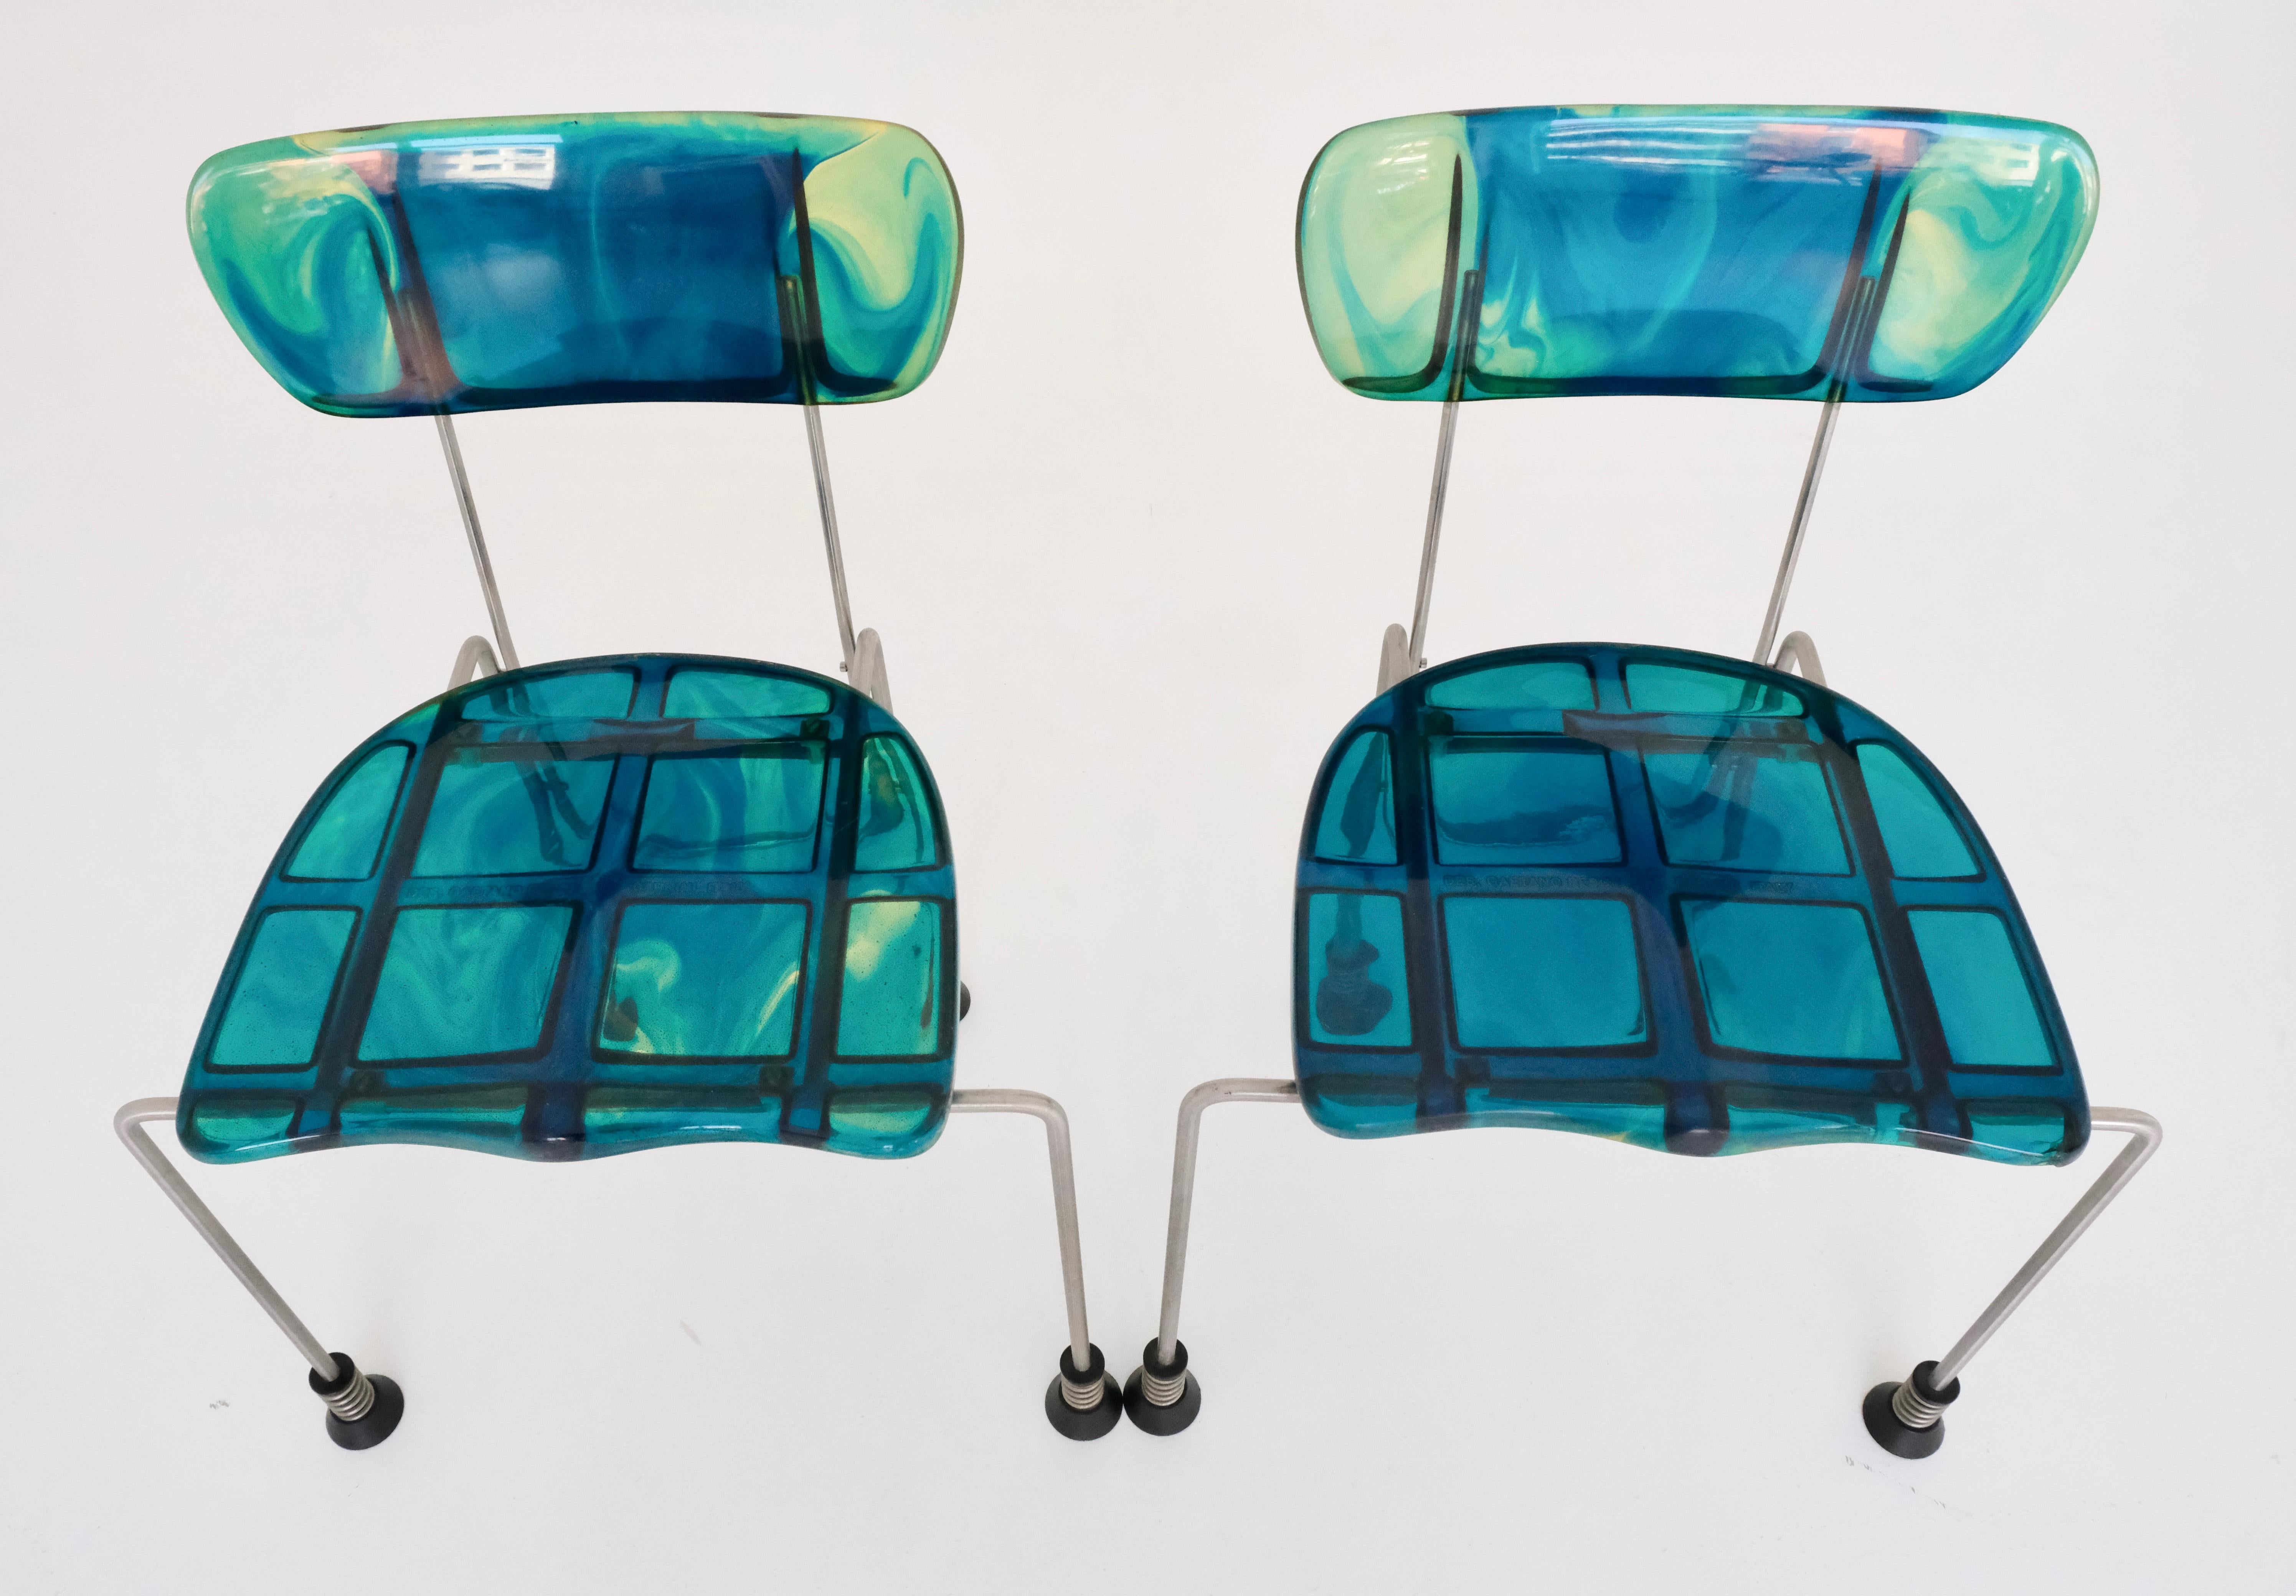 A very rare pair of ‚broadway‘ chairs by Gaetano Pesce for Italian company Bernini, 1993.

Multicolored cast epoxy resin (mainly blue and green), brushed steel legs, spring and rubber-capped feet. All chairs signed with cast manufacturer’s mark